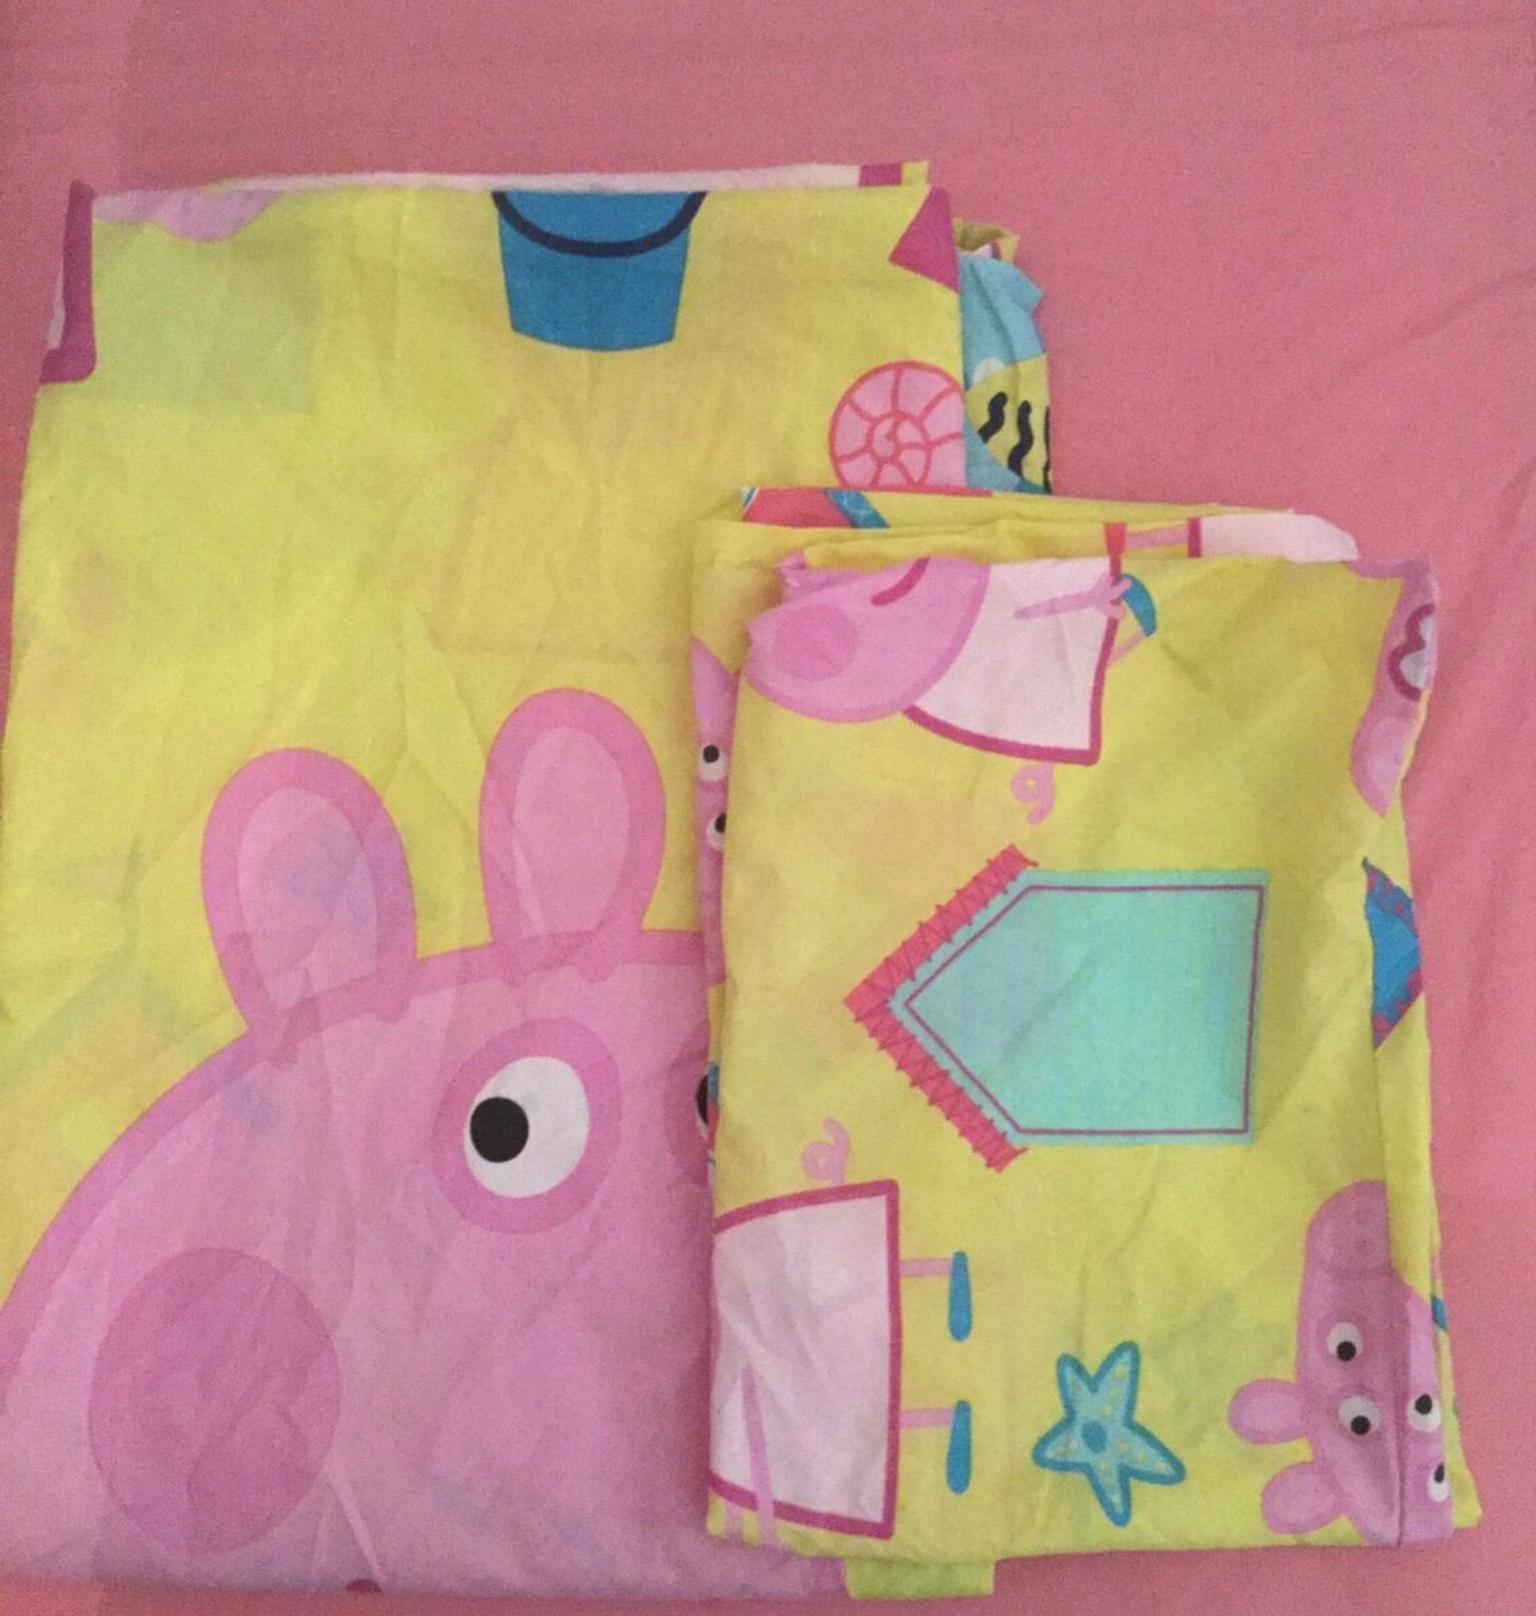 Peppa Pig Single Duvet Set In Le3 Leicester For 8 00 For Sale